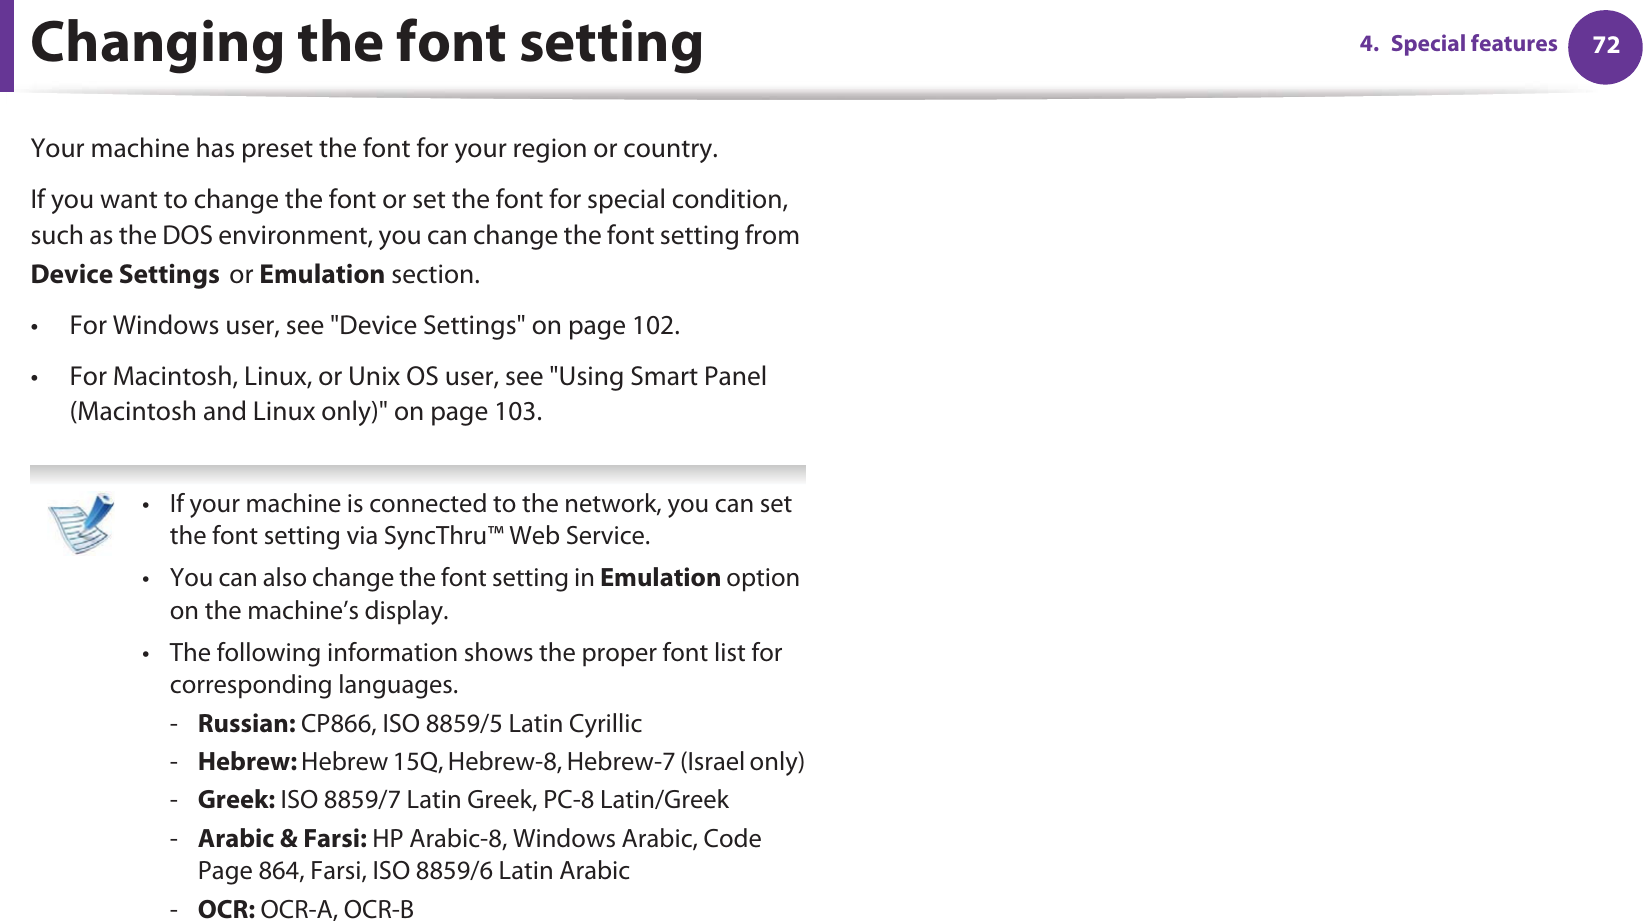 724. Special featuresChanging the font setting Your machine has preset the font for your region or country.If you want to change the font or set the font for special condition, such as the DOS environment, you can change the font setting from Device SettingsGor Emulation section.• For Windows user, see &quot;Device Settings&quot; on page 102.• For Macintosh, Linux, or Unix OS user, see &quot;Using Smart Panel (Macintosh and Linux only)&quot; on page 103. • If your machine is connected to the network, you can set the font setting via SyncThru™ Web Service.• You can also change the font setting in Emulation option on the machine’s display.• The following information shows the proper font list for corresponding languages.-Russian: CP866, ISO 8859/5 Latin Cyrillic-Hebrew: Hebrew 15Q, Hebrew-8, Hebrew-7 (Israel only)-Greek: ISO 8859/7 Latin Greek, PC-8 Latin/Greek-Arabic &amp; Farsi: HP Arabic-8, Windows Arabic, Code Page 864, Farsi, ISO 8859/6 Latin Arabic-OCR: OCR-A, OCR-B 